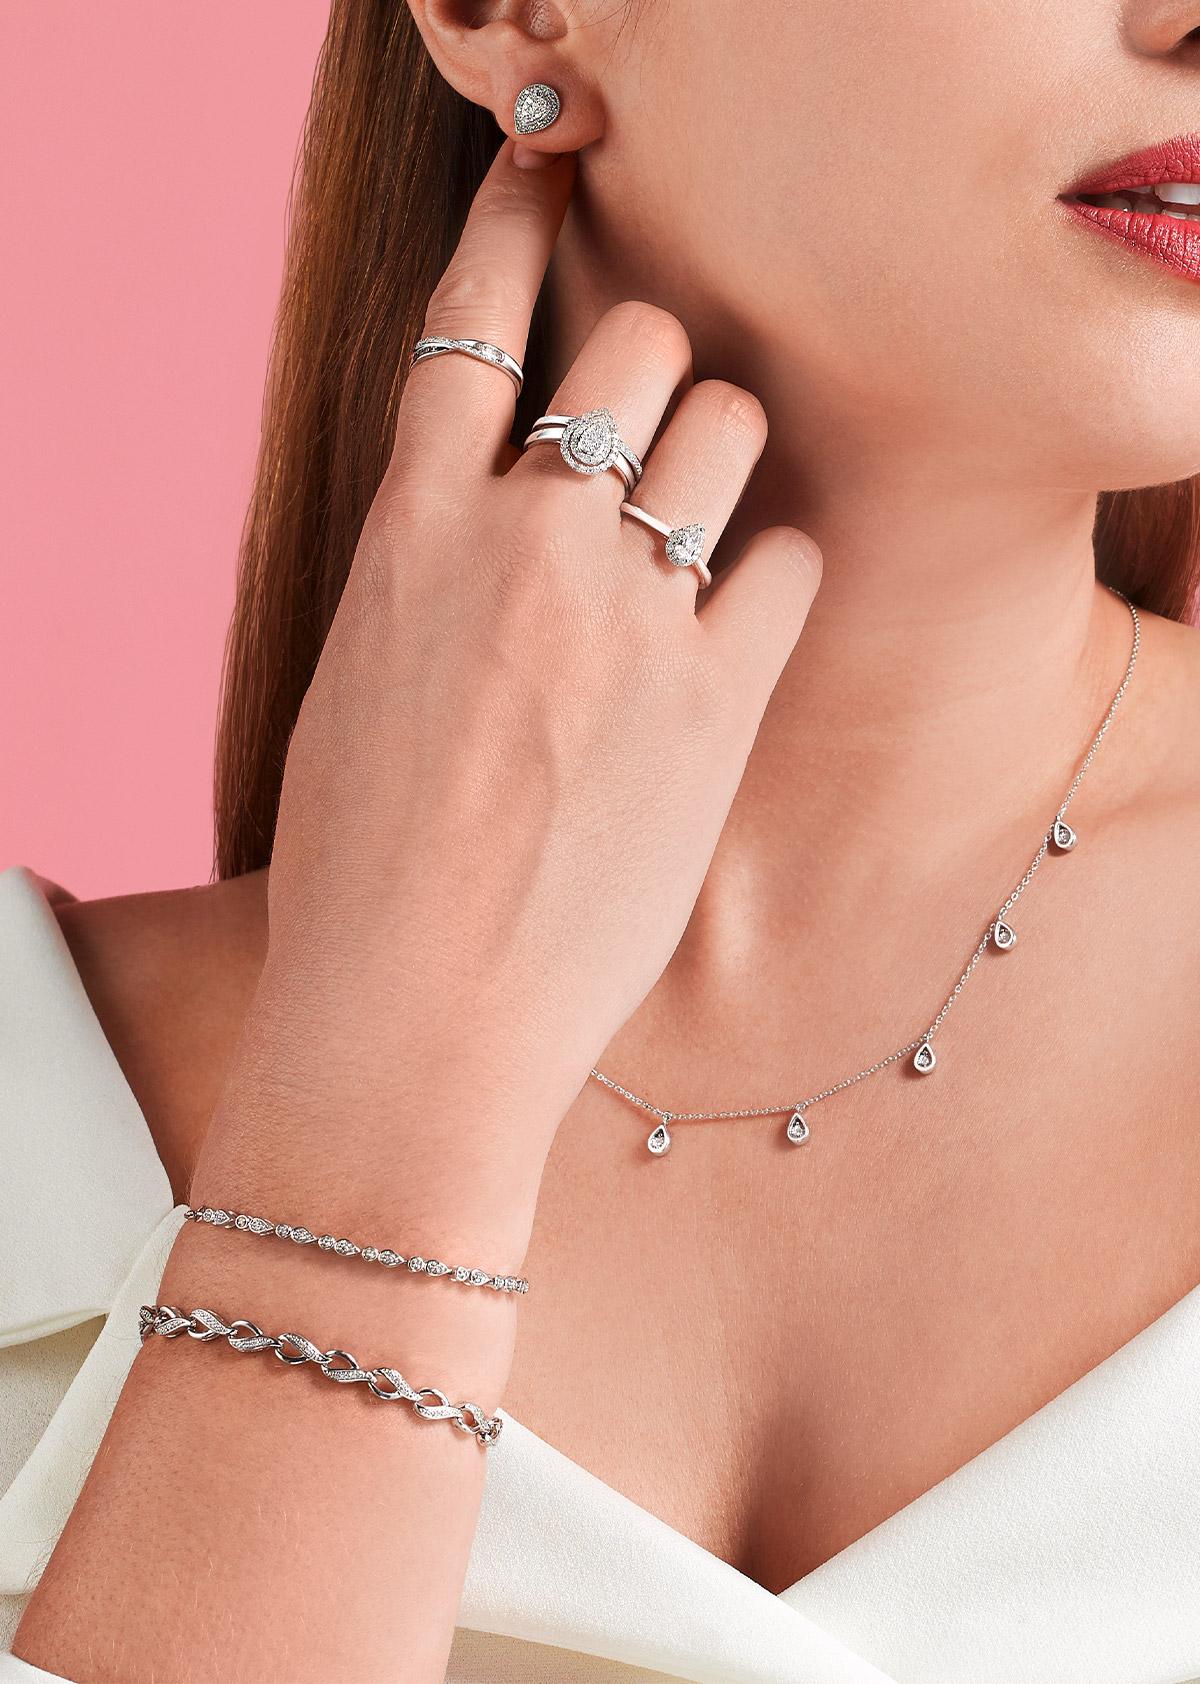 How Your Jewellery Spells Out Your Vibe? Lady wearing diamond rings, earrings, tennis bracelets and necklace.